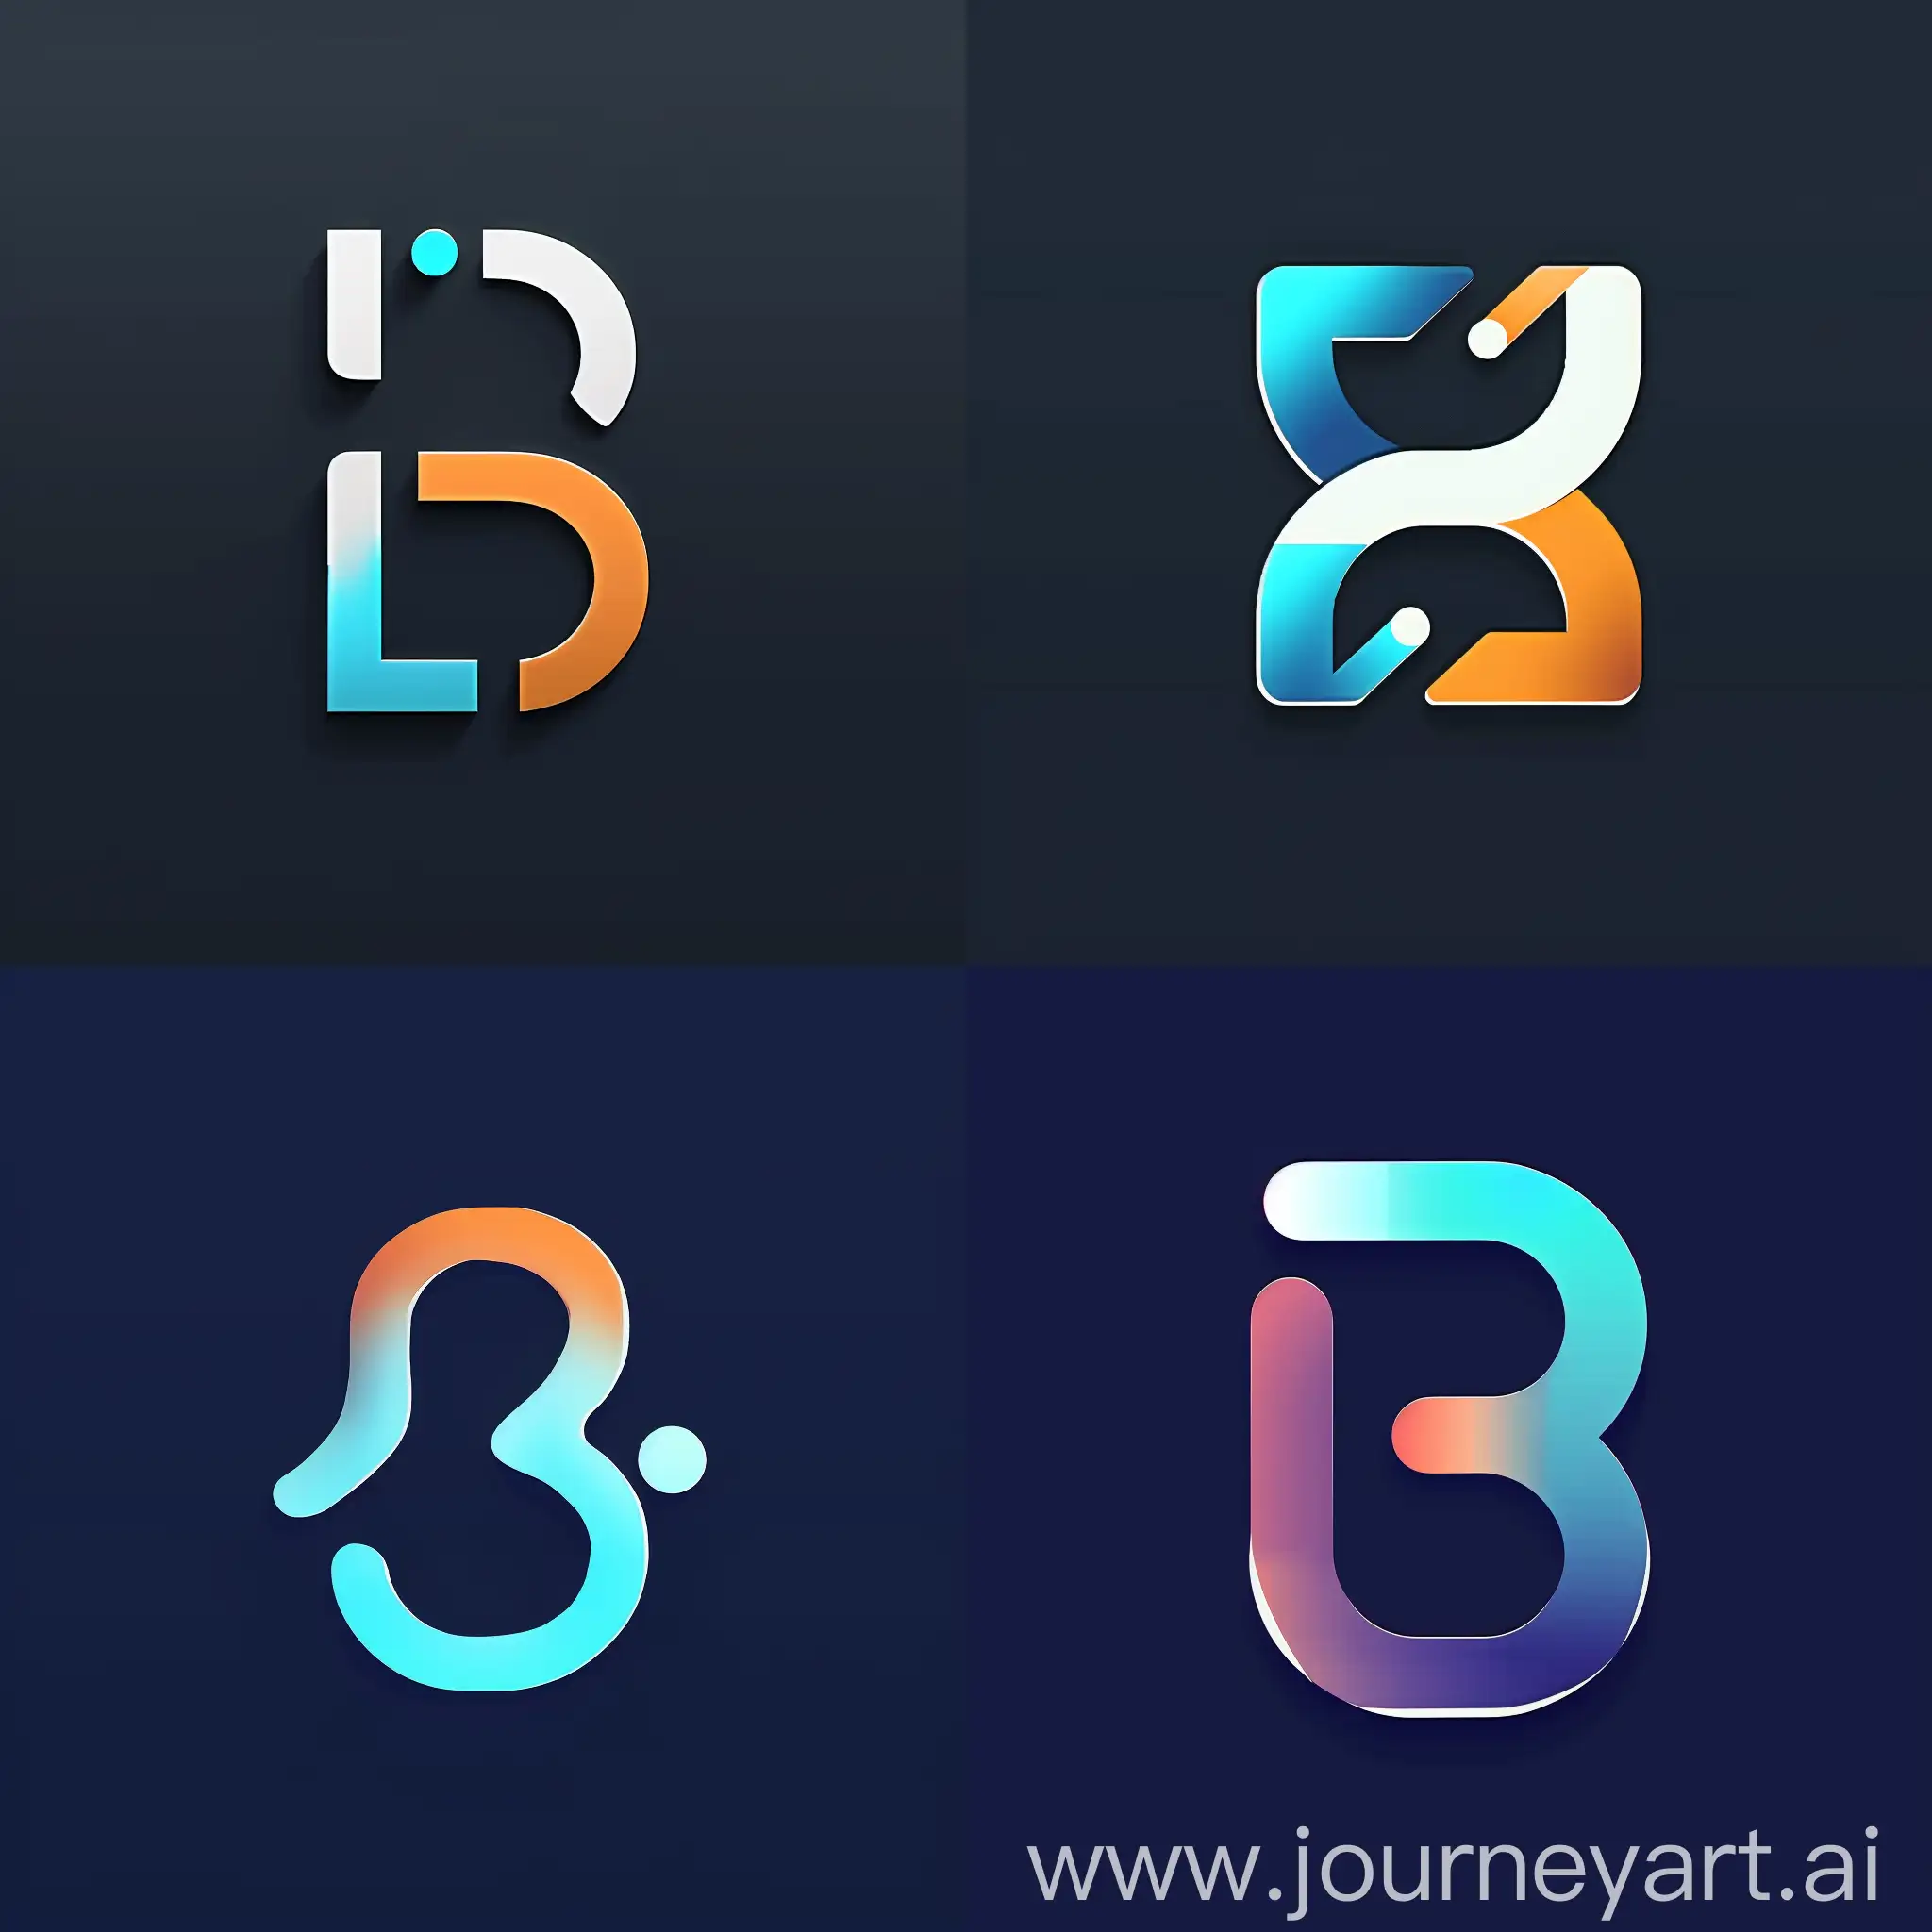 A modern and minimalistic logo related to the letter 'B' for a software development agency. 